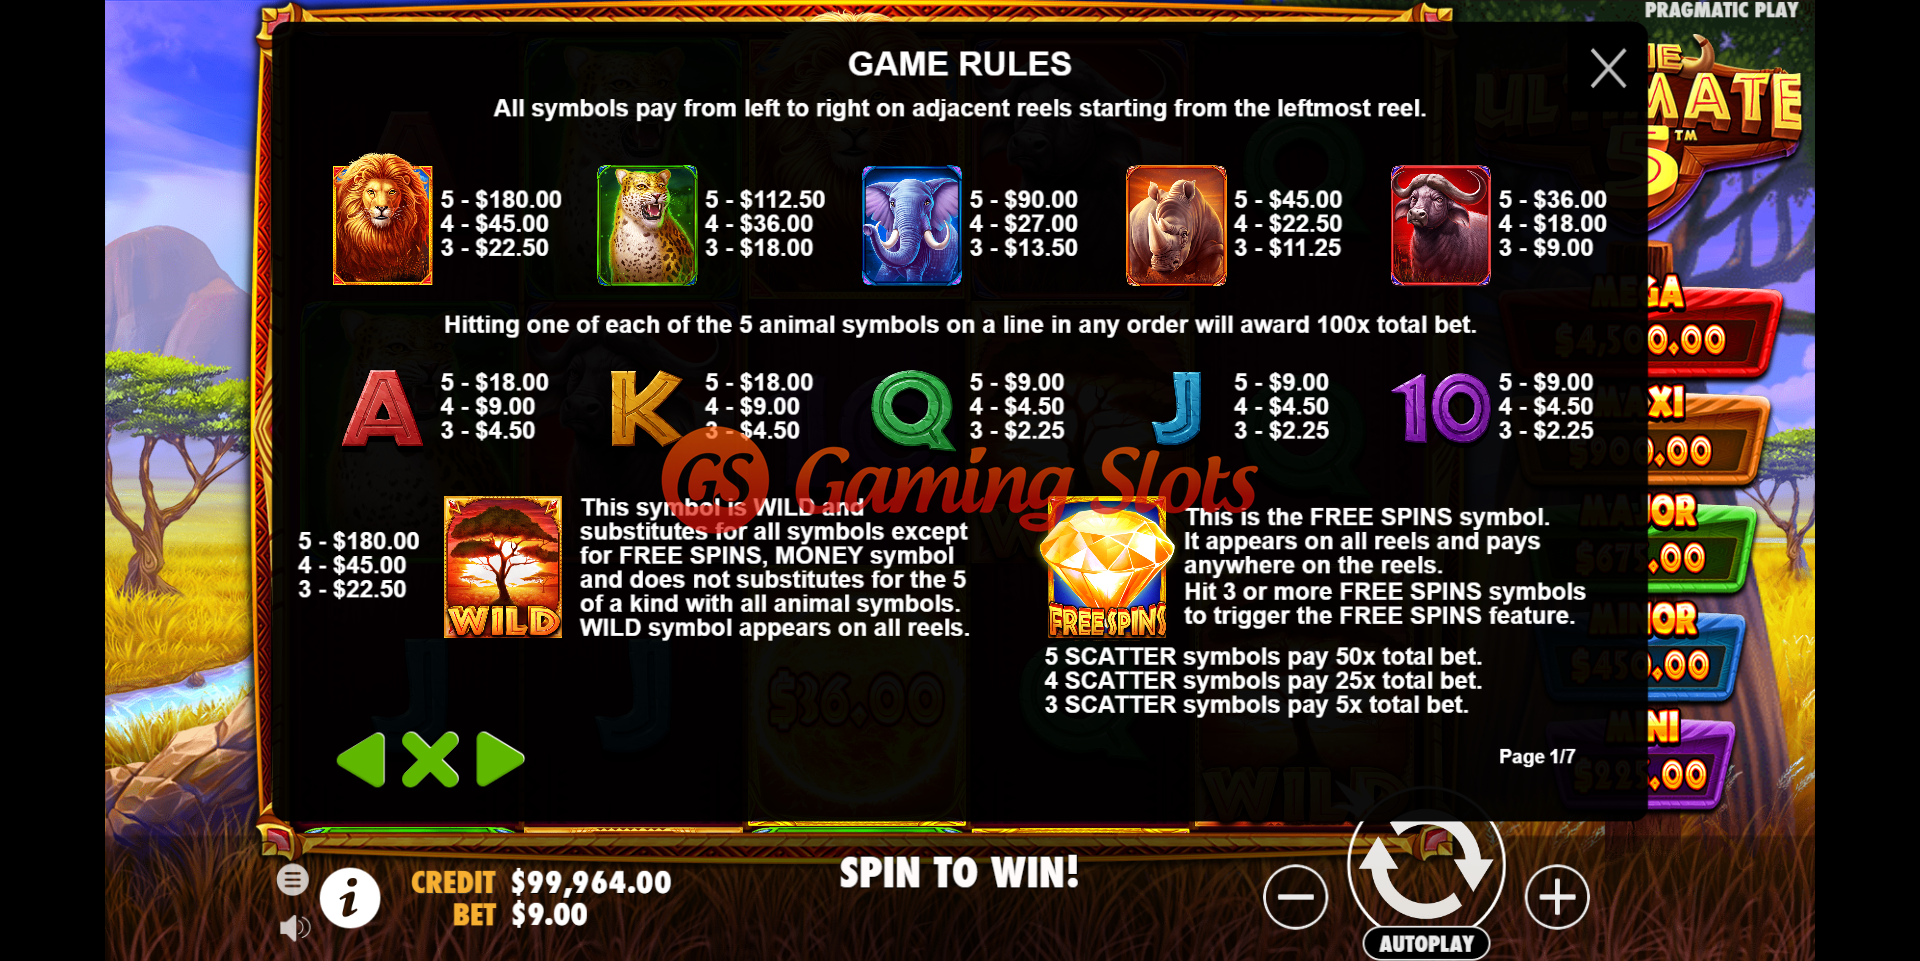 Game Rules for The Ultimate 5 slot from Pragmatic Play